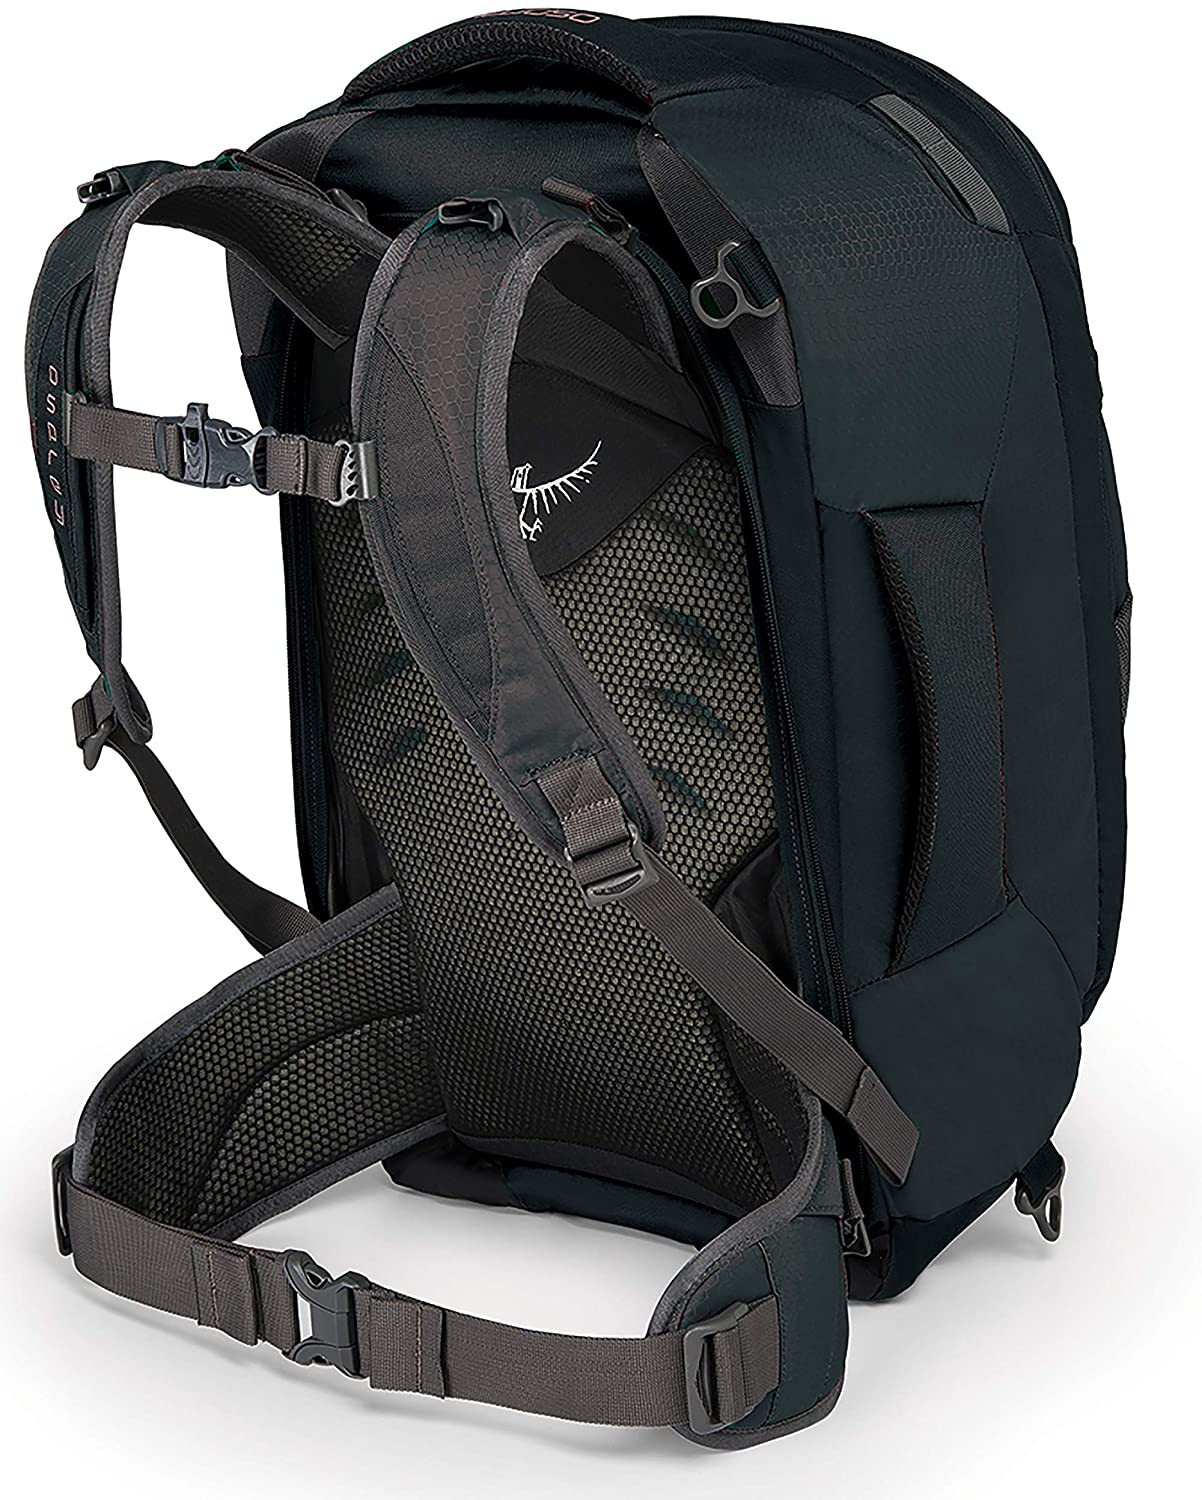 Osprey Farpoint 40 Travel Pack - image 3 of 4